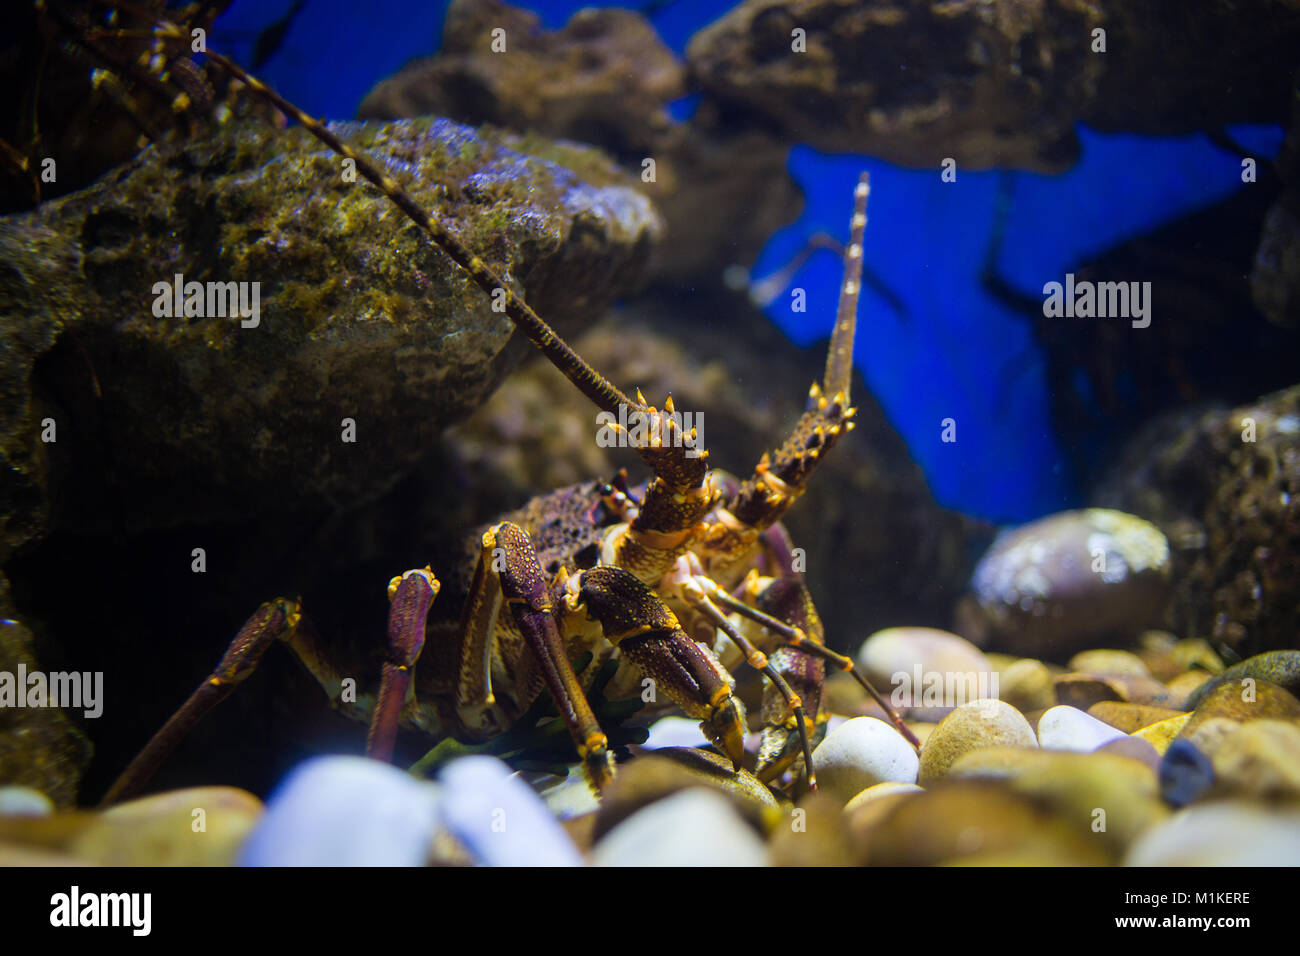 Close up image of a rock lobster in an aquarium, close to the west coast of south africa Stock Photo